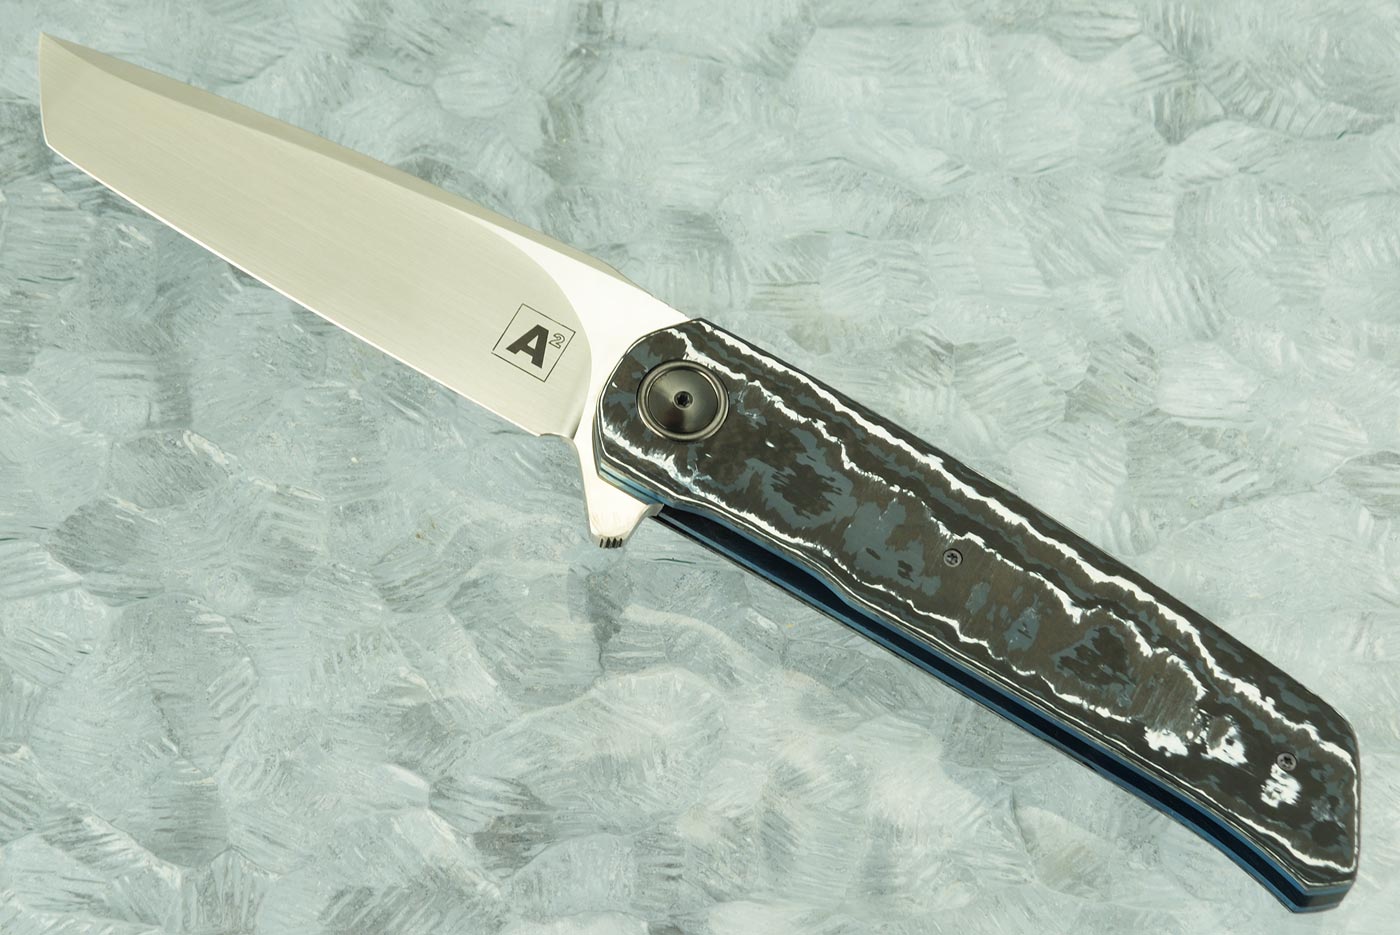 A7 Flipper with White Storm FatCarbon (Ceramic IKBS)